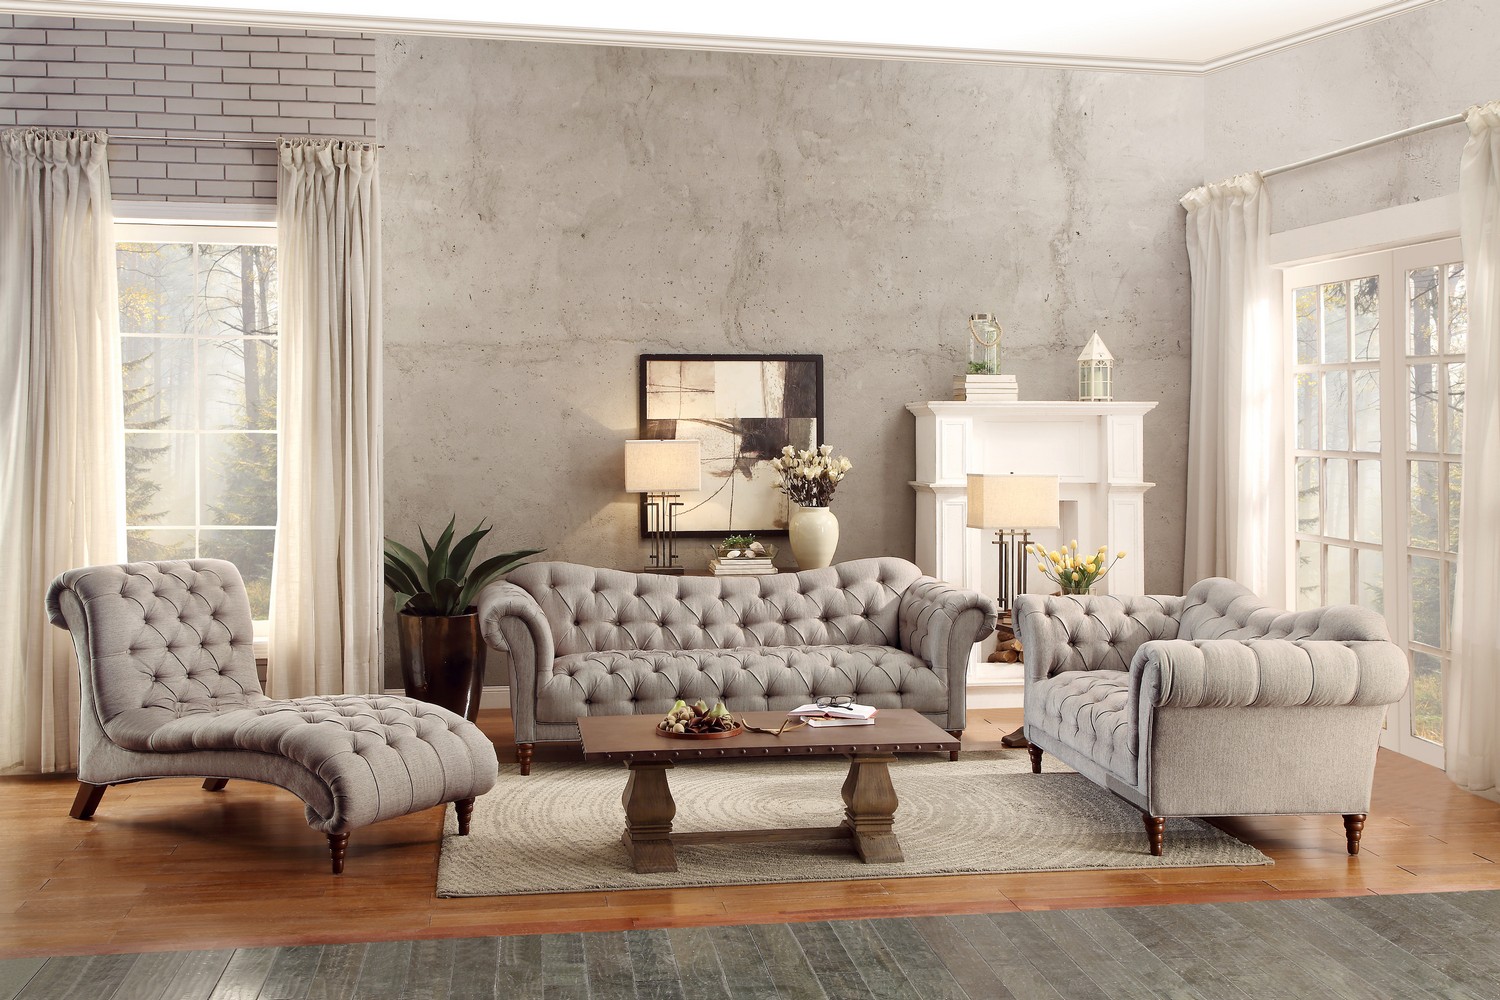 Homelegance St. Claire Sofa Set - Polyester - Brown Tone